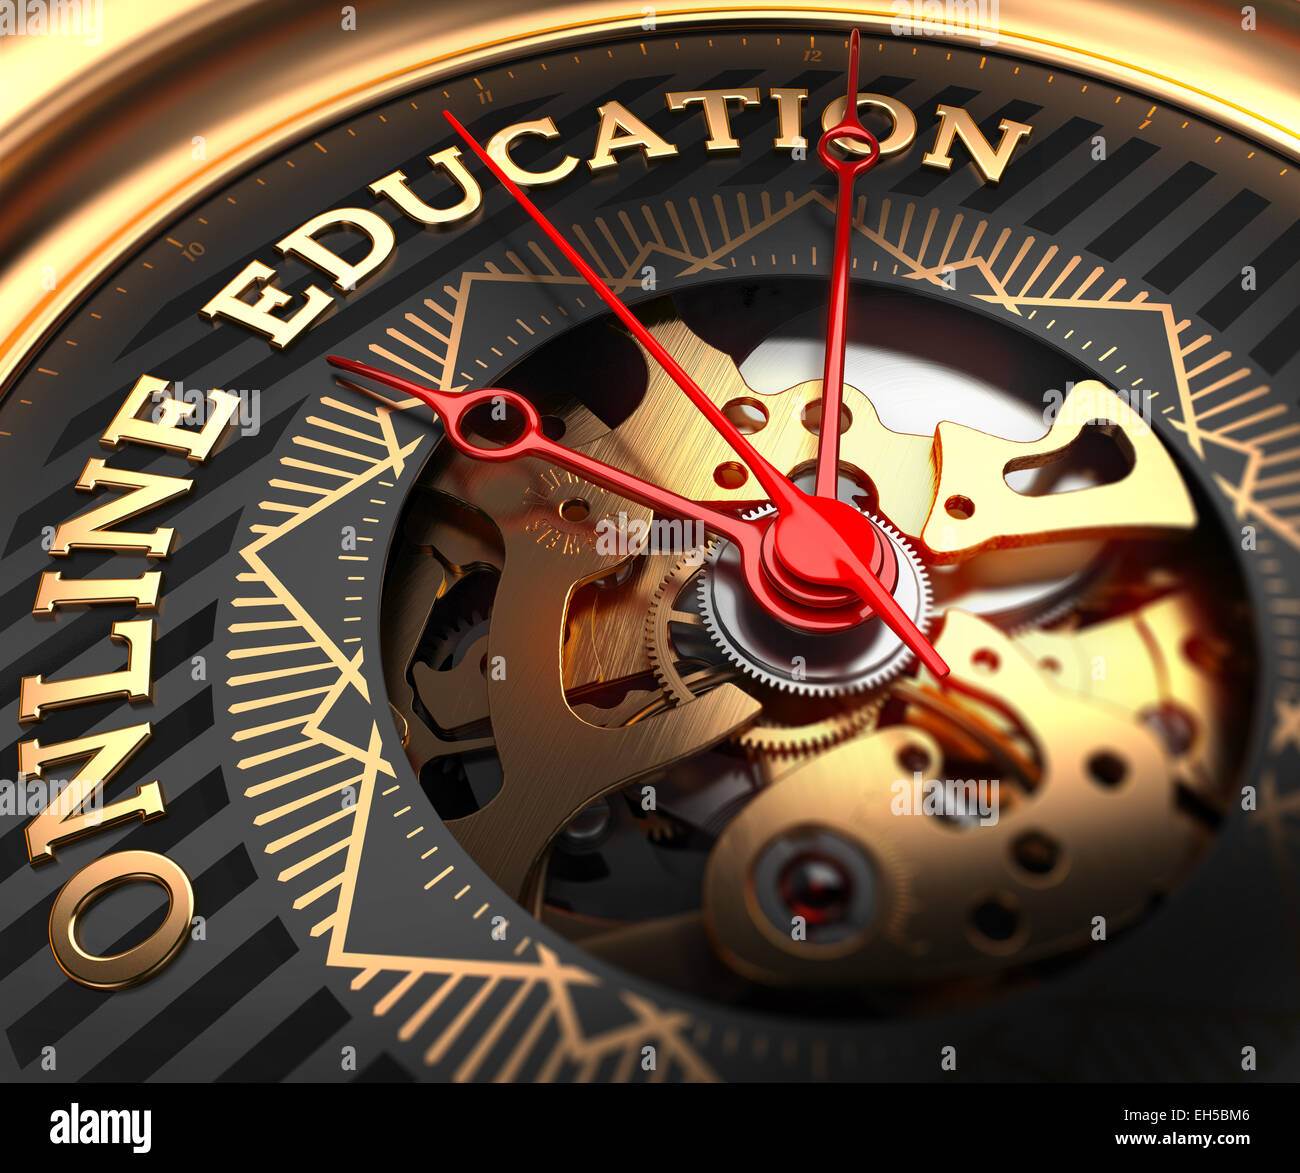 Online Education on Black-Golden Watch Face with Closeup View of Watch Mechanism. Stock Photo